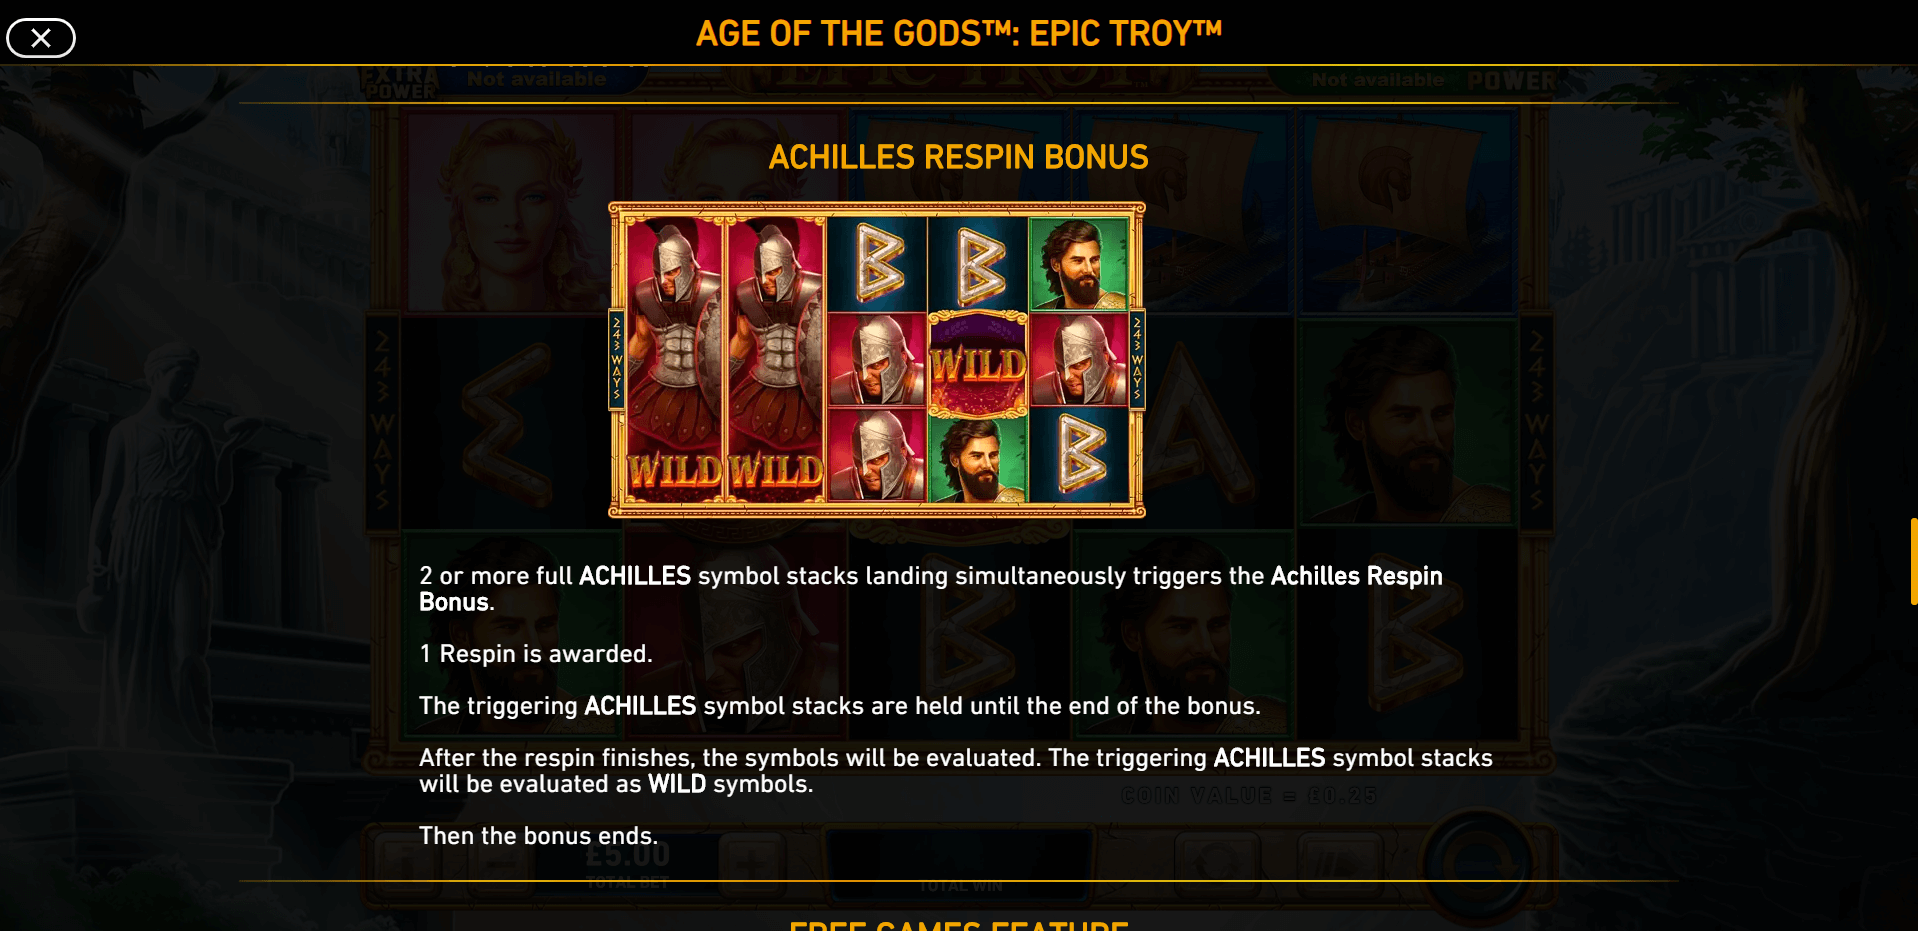 Age of the gods epic troy rtp online